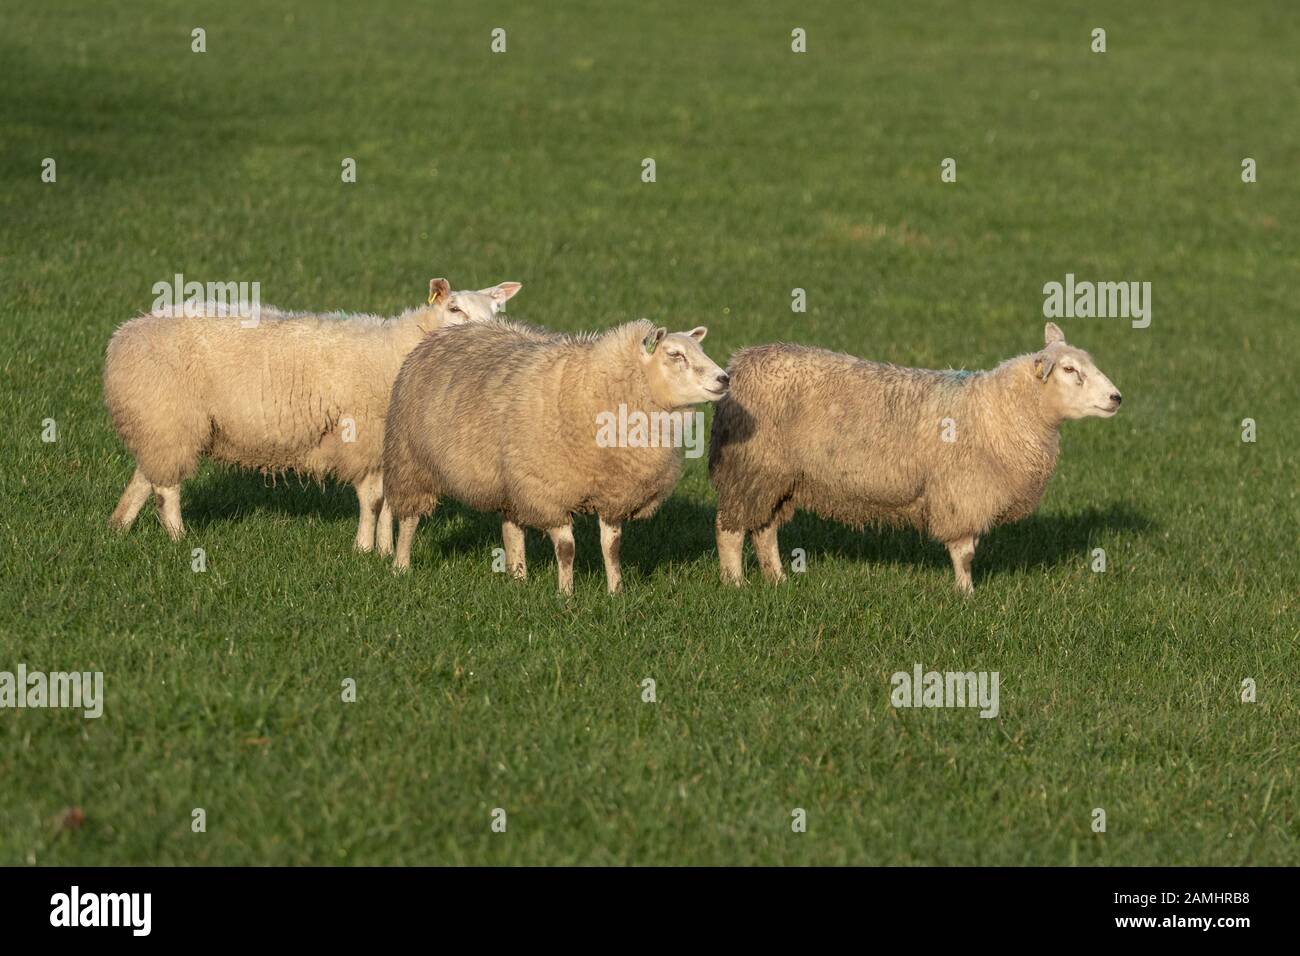 Three sheep standing in a middle of a field. Stock Photo